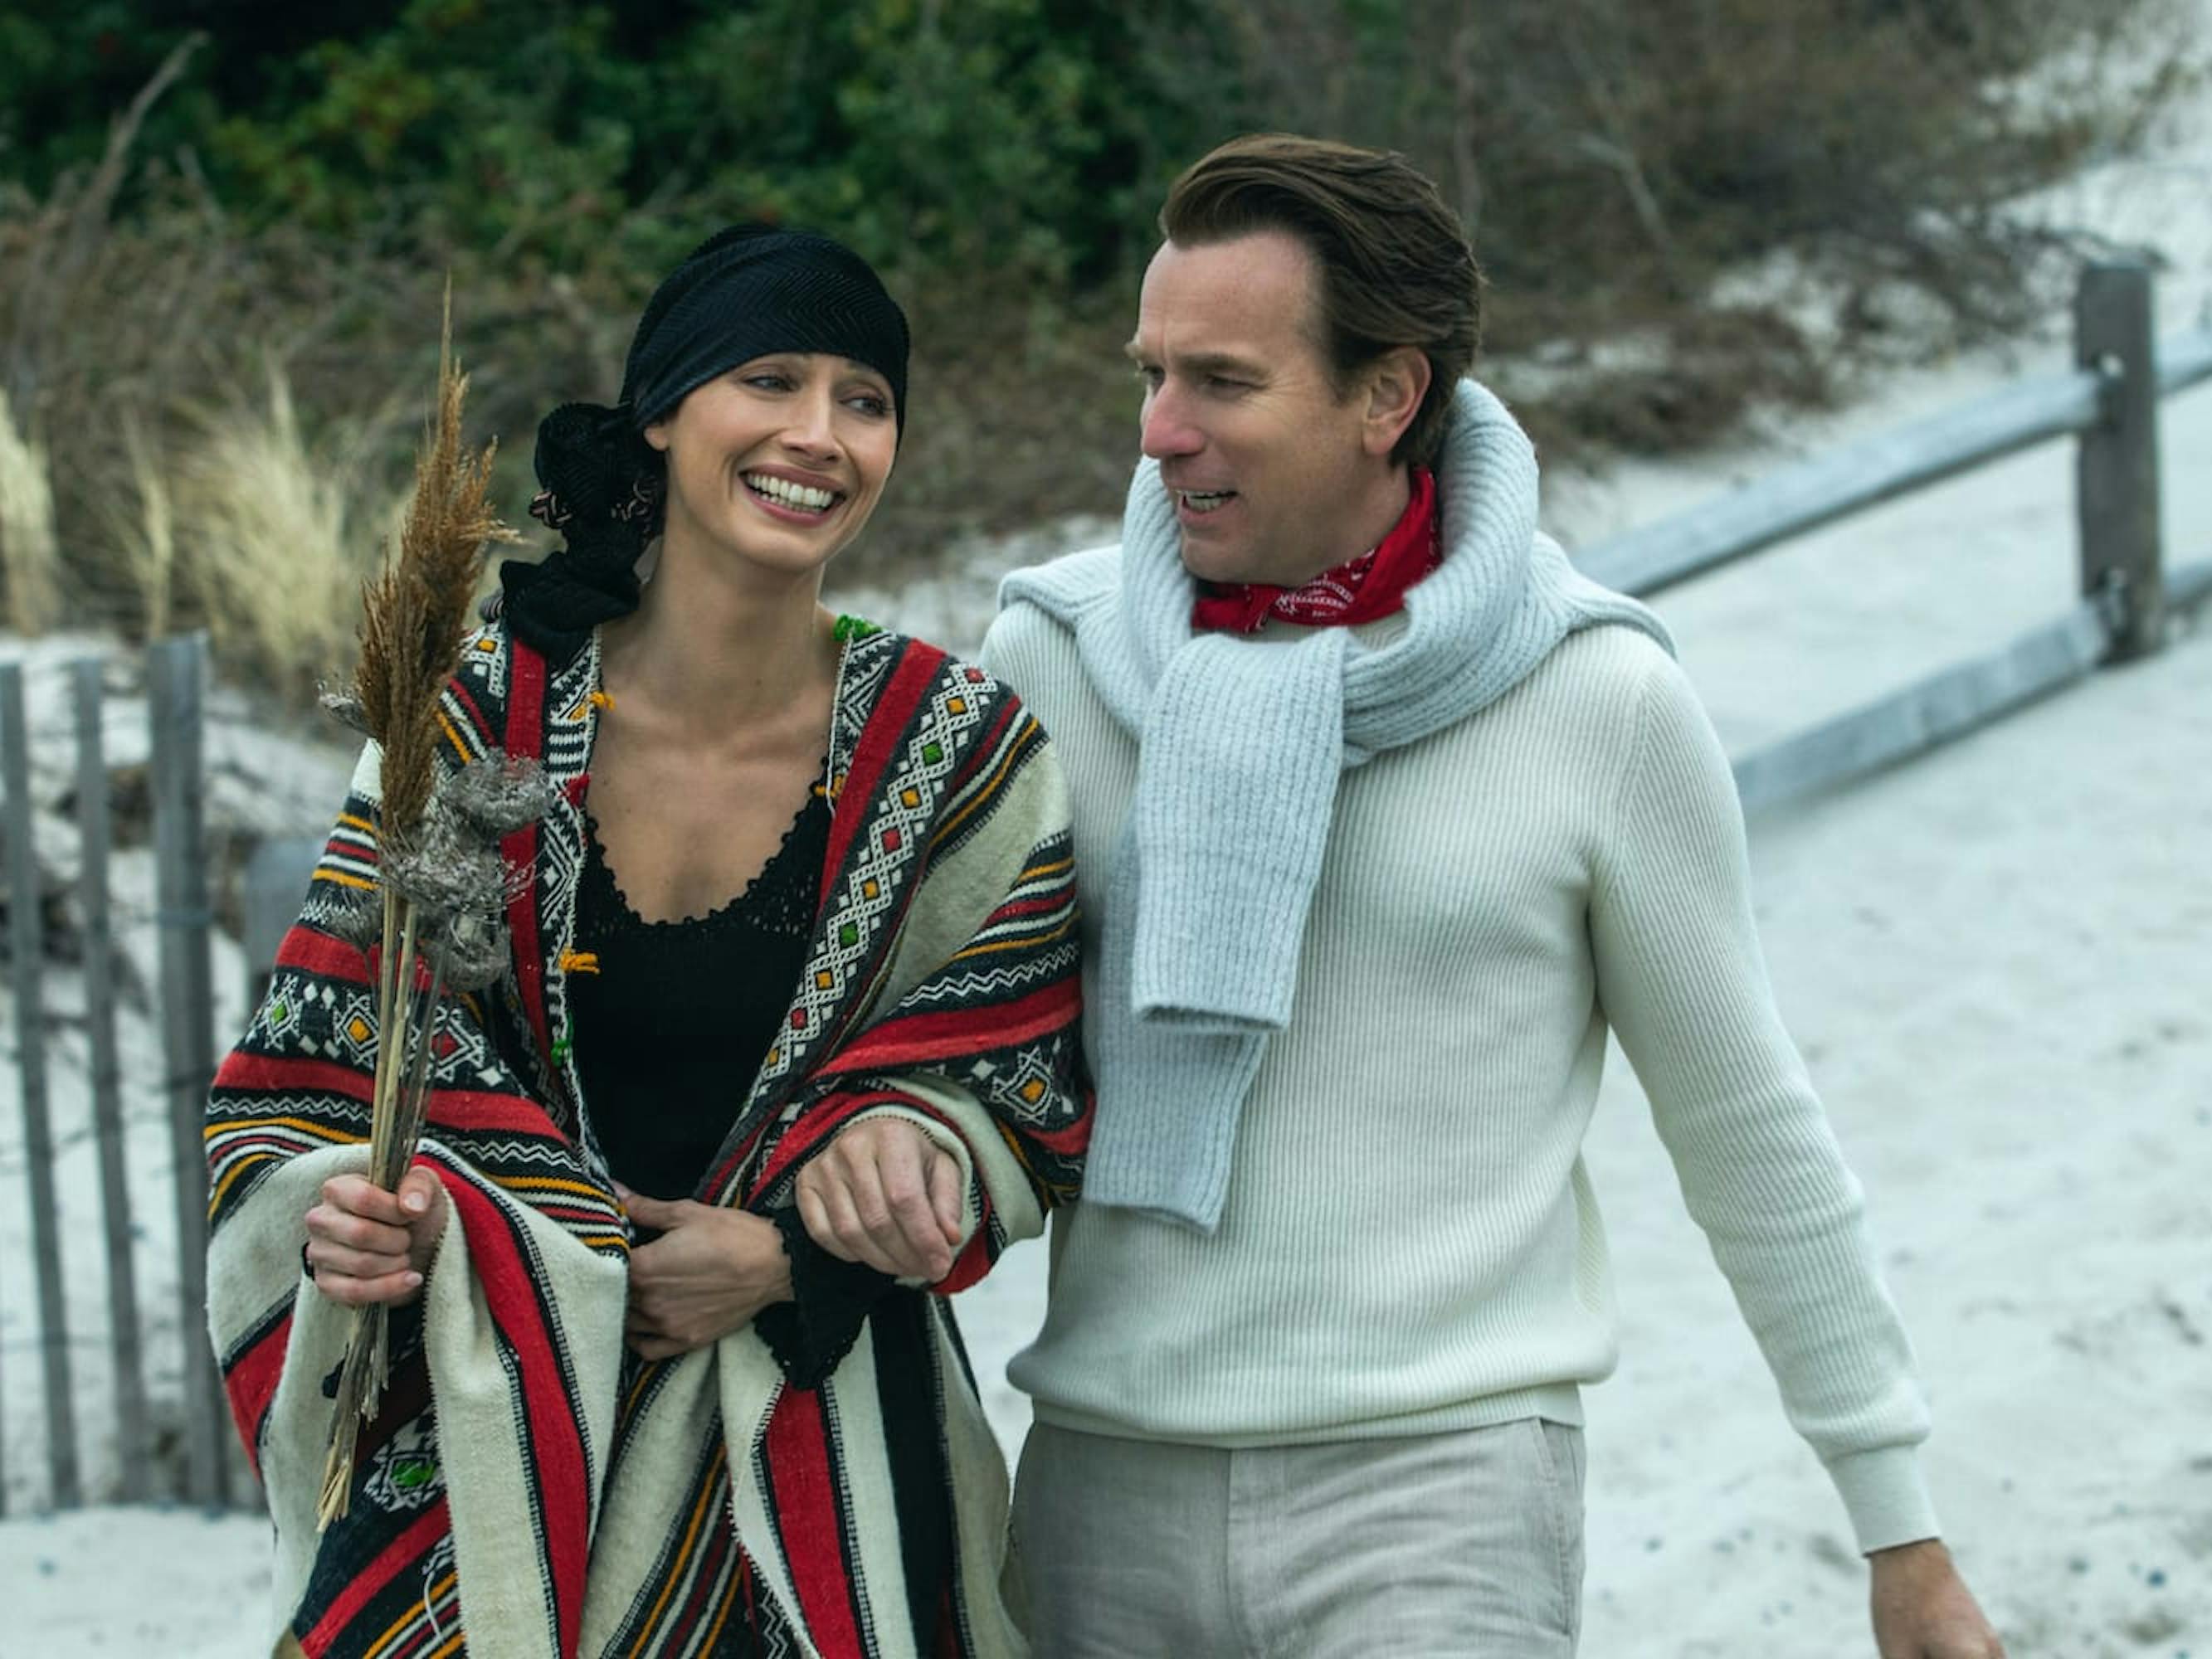 Elsa Peretti (Rebecca Dayan) and Halston (Ewan McGregor) walk on a chilly beach. Halston looks unrecognizable in his all white outfit, with a sweater tied around his shoulders. Elsa Peretti wears a scarf like cover, with a black scarf tied around her head. They laugh in this happy candid moment.